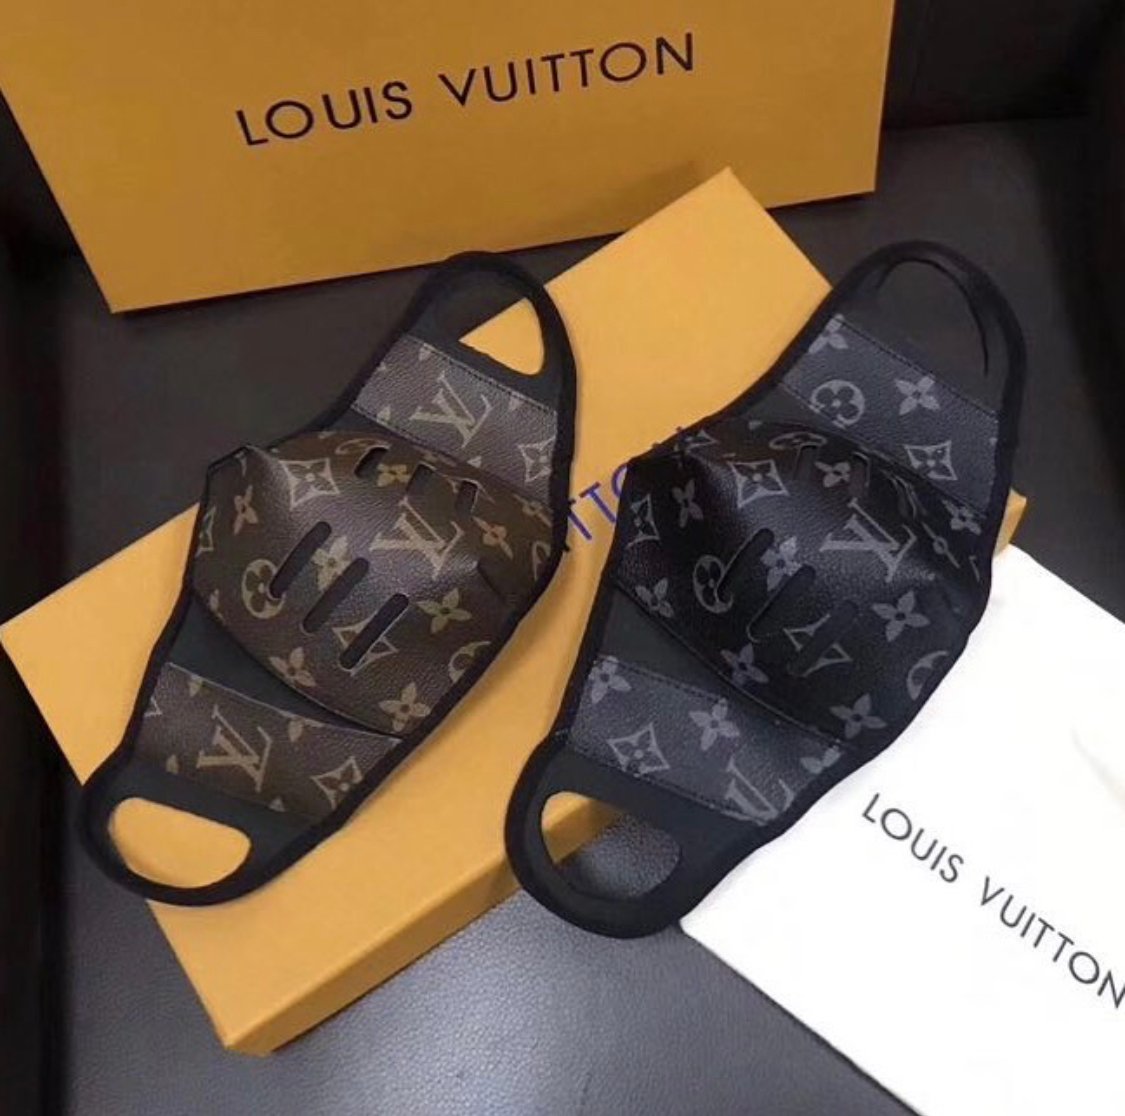 Luxurious LV Face Mask- BLACK & GREY CROSS HATCH CLASSIC - Mikaaa